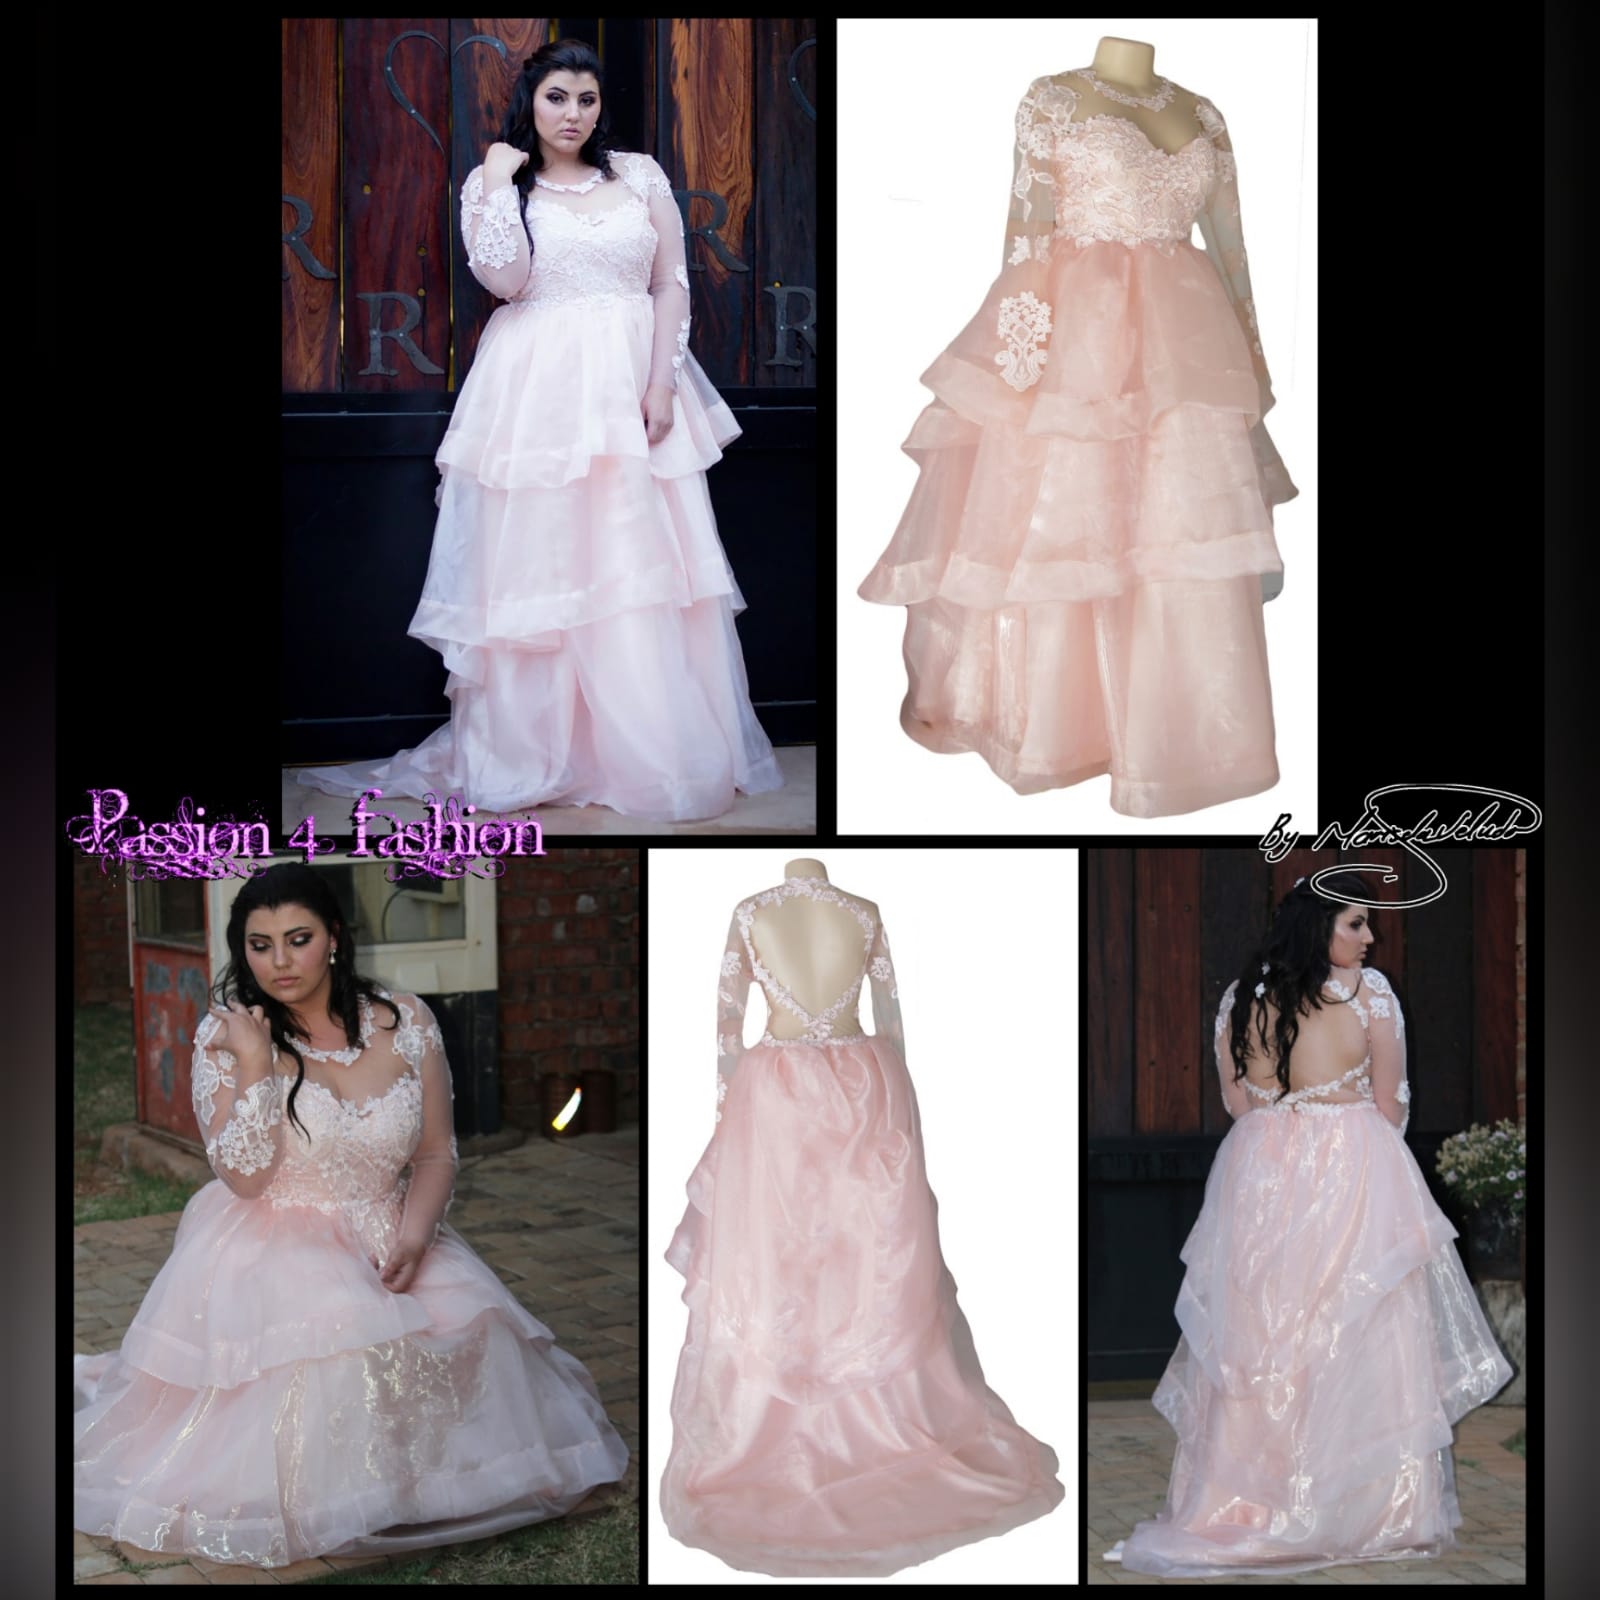 Baby pink long organza and lace prom ballgown 2 baby pink long organza and lace prom ballgown. This unique dress has a lace bodice with illusion neckline and sleeves and an open back. Bottom with a 3 layer organza design with a little train.